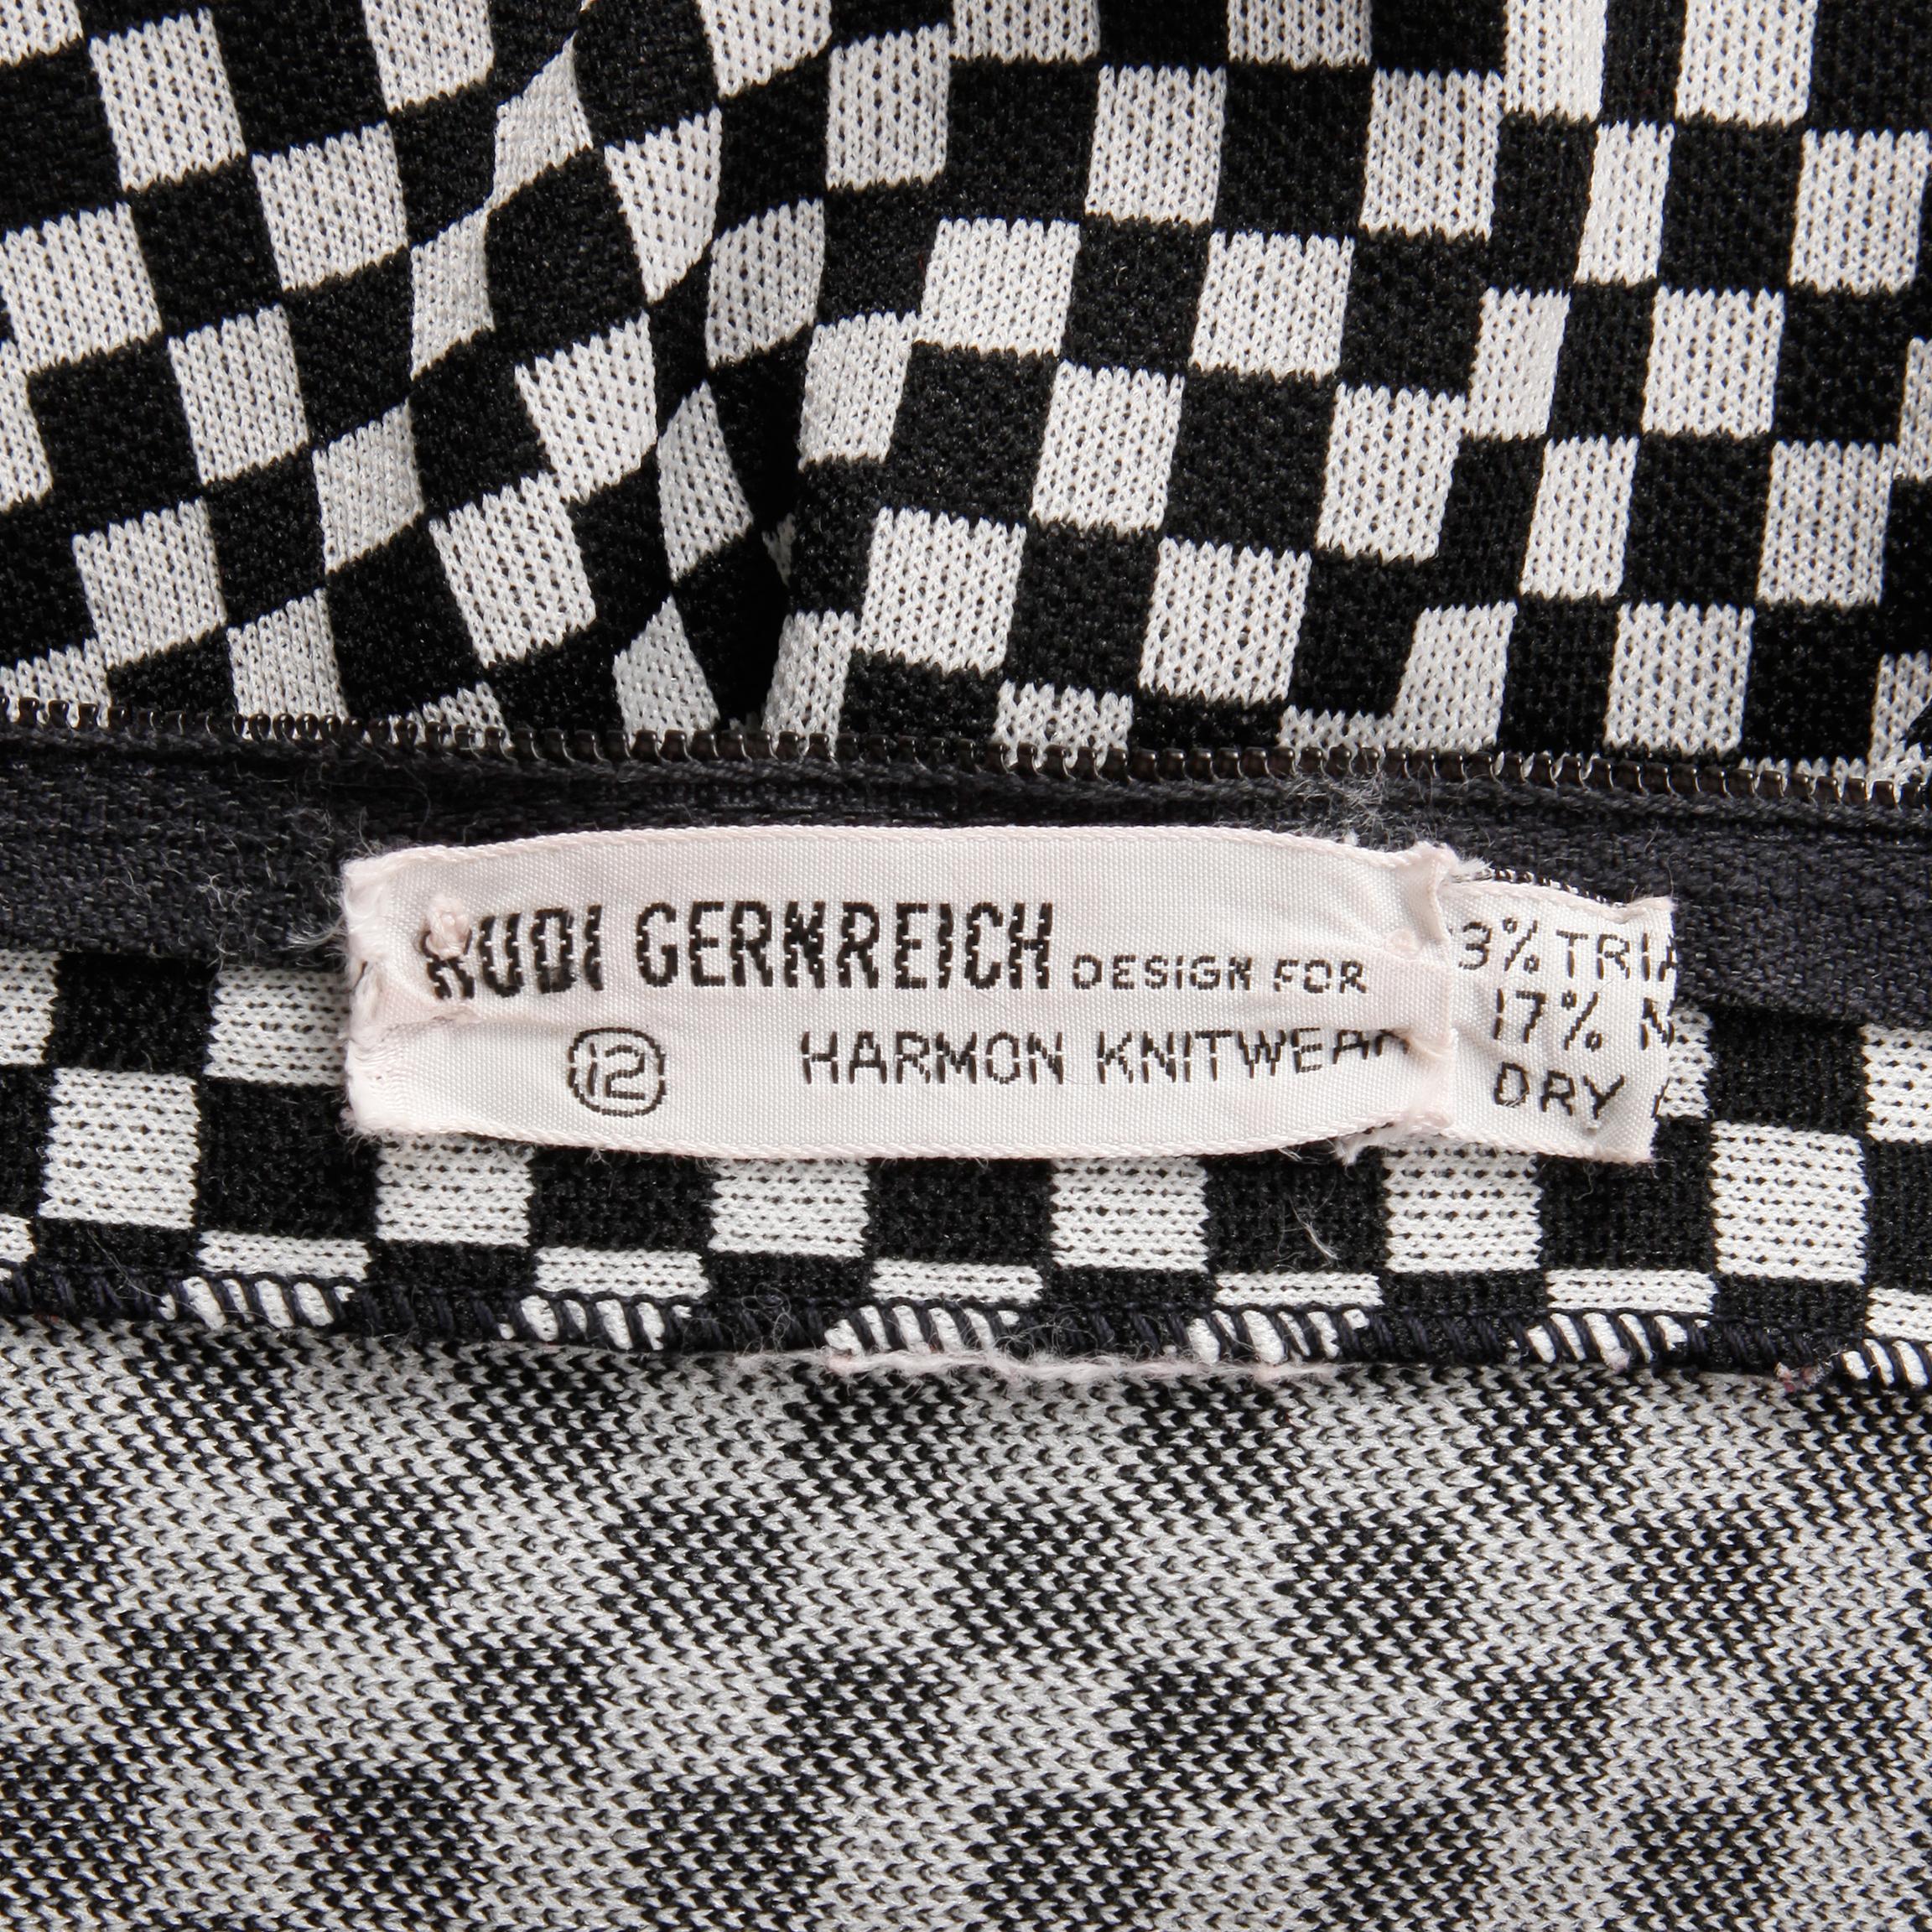 Rare and iconic vintage black and white checkered mini dress by Rudi Gernreich for Harmon Knitwear. Short sleeves and Unlined with rear zip and hook closure. Hidden side pockets.  73% Triacetate, 17% nylon. The marked size is 12, but the dress fits